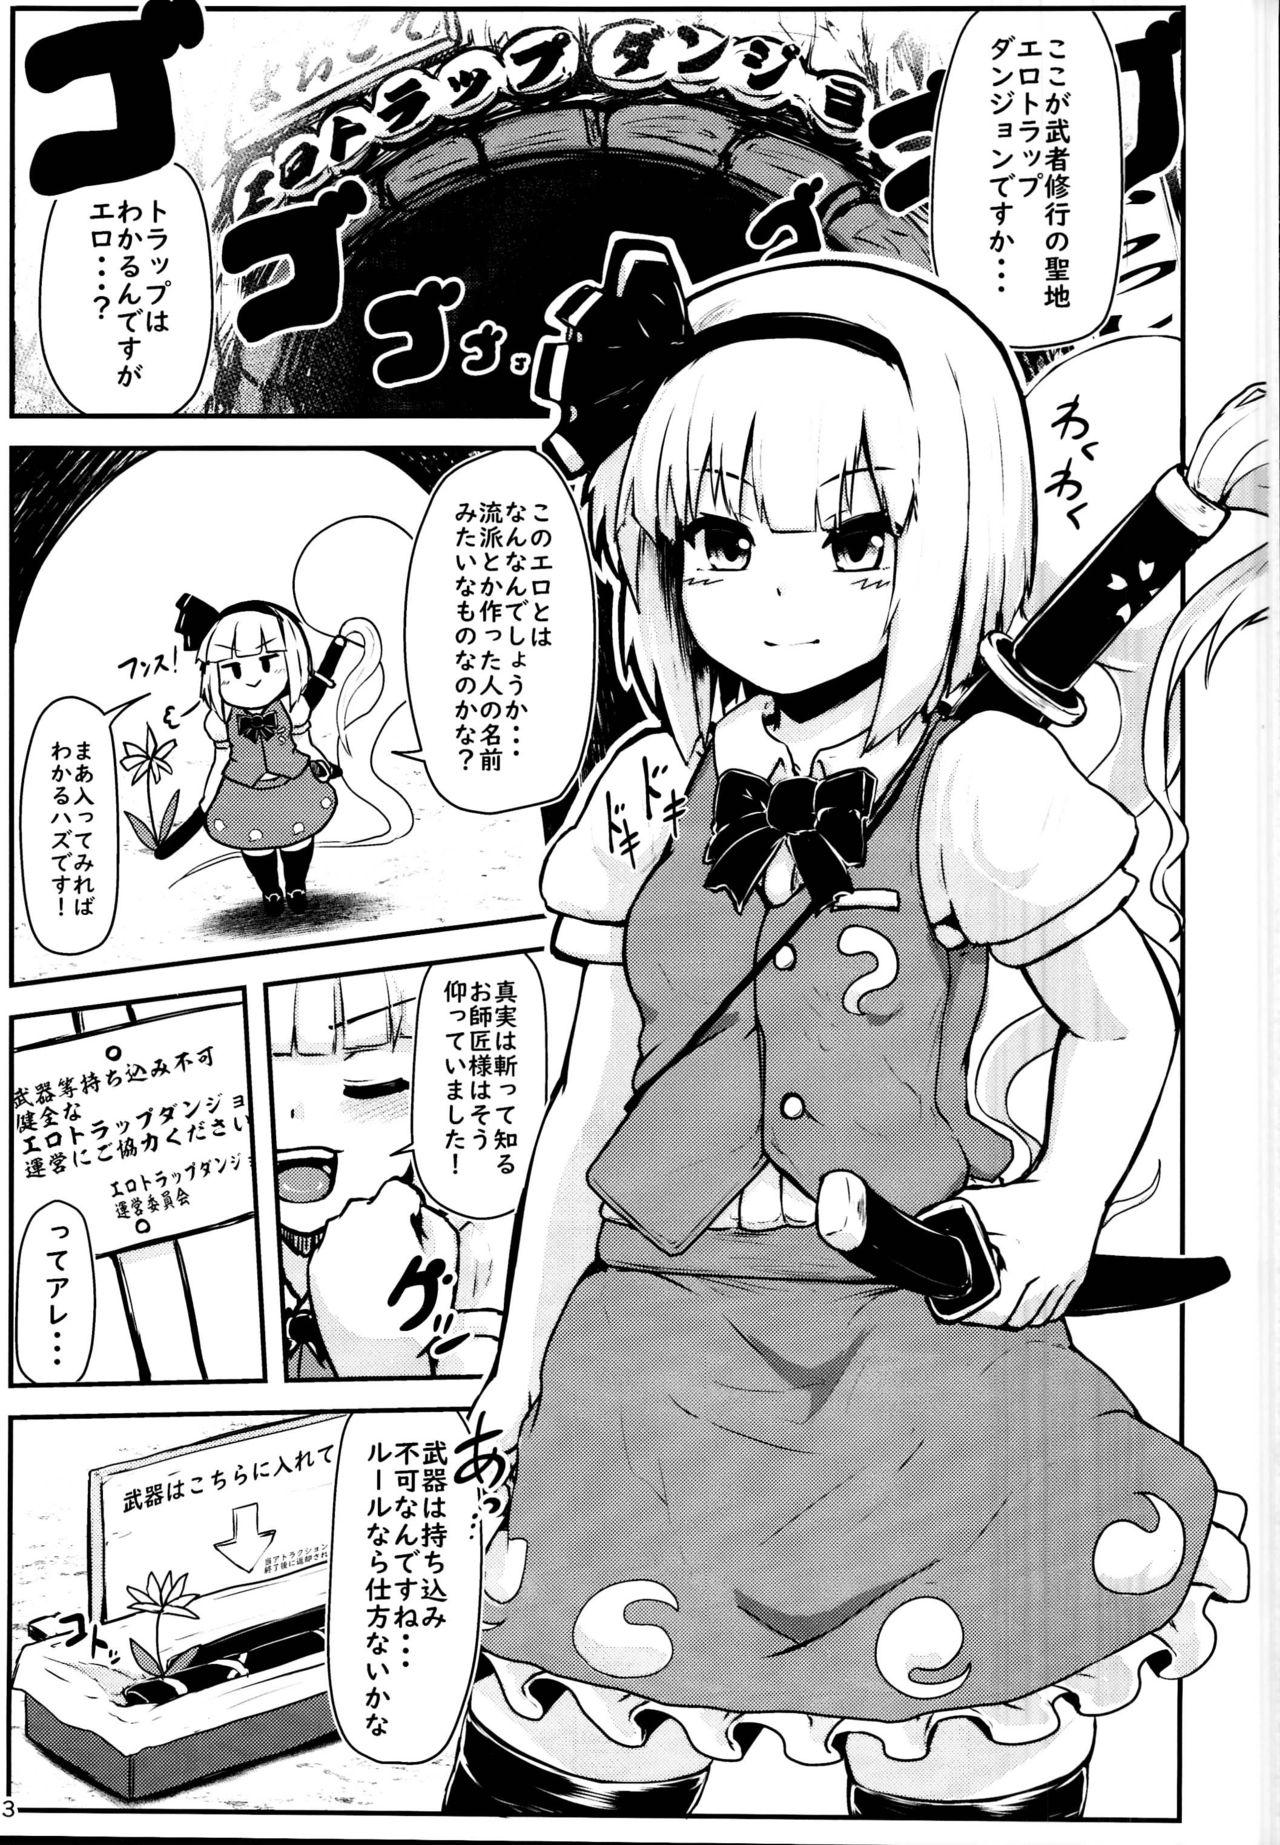 Hardcore Gay Youmu in Ero Trap Dungeon - Touhou project Gay Pornstar - Page 3